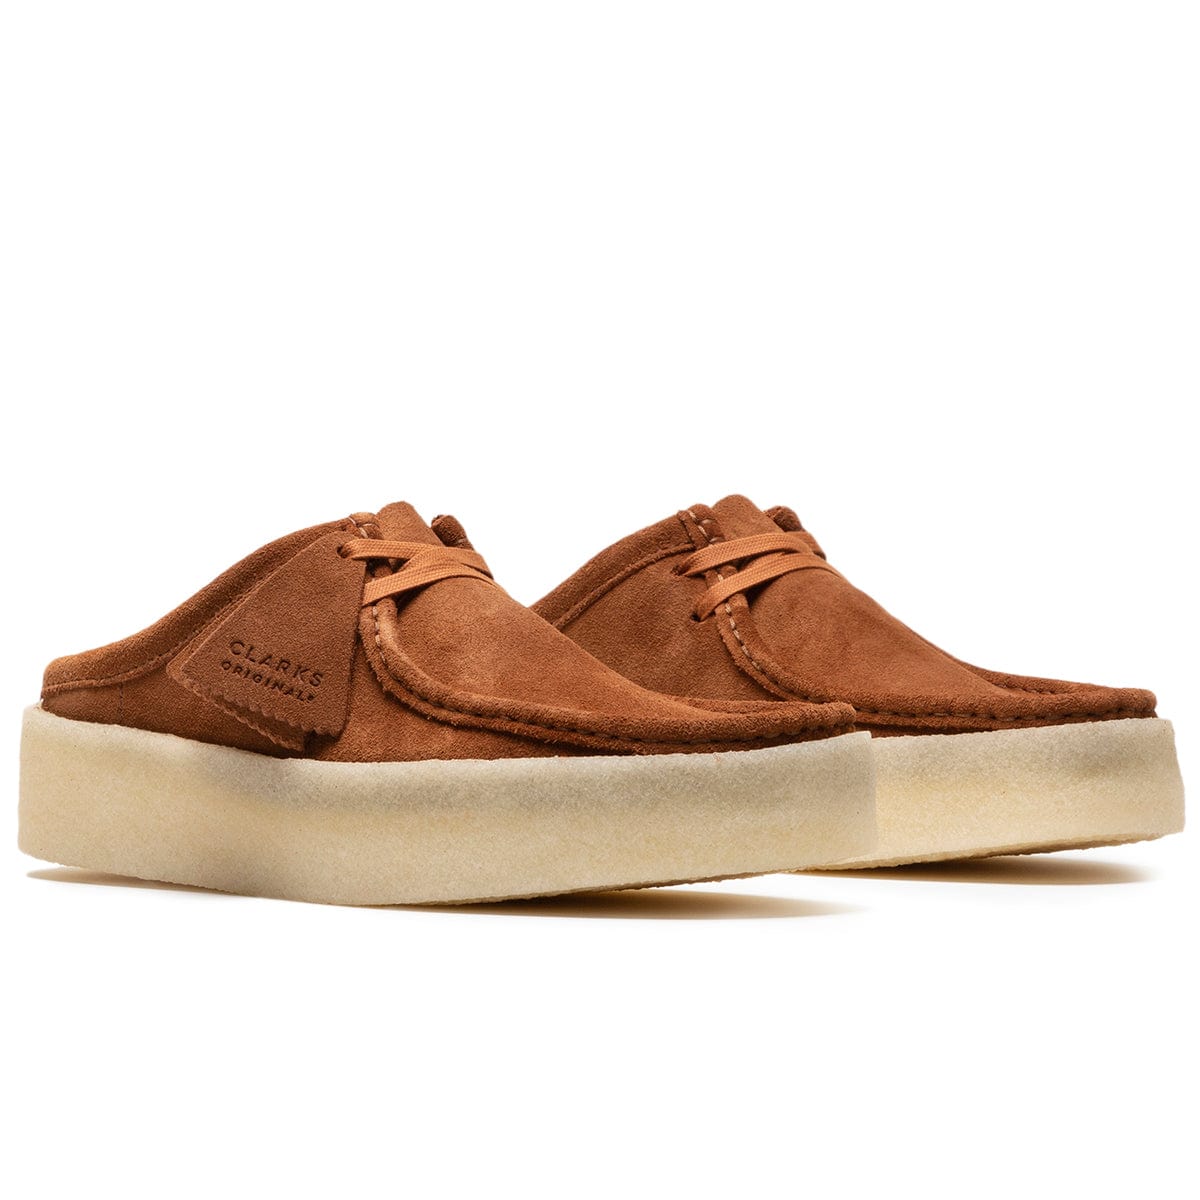 Clarks Casual WALLABEE CUP MULE